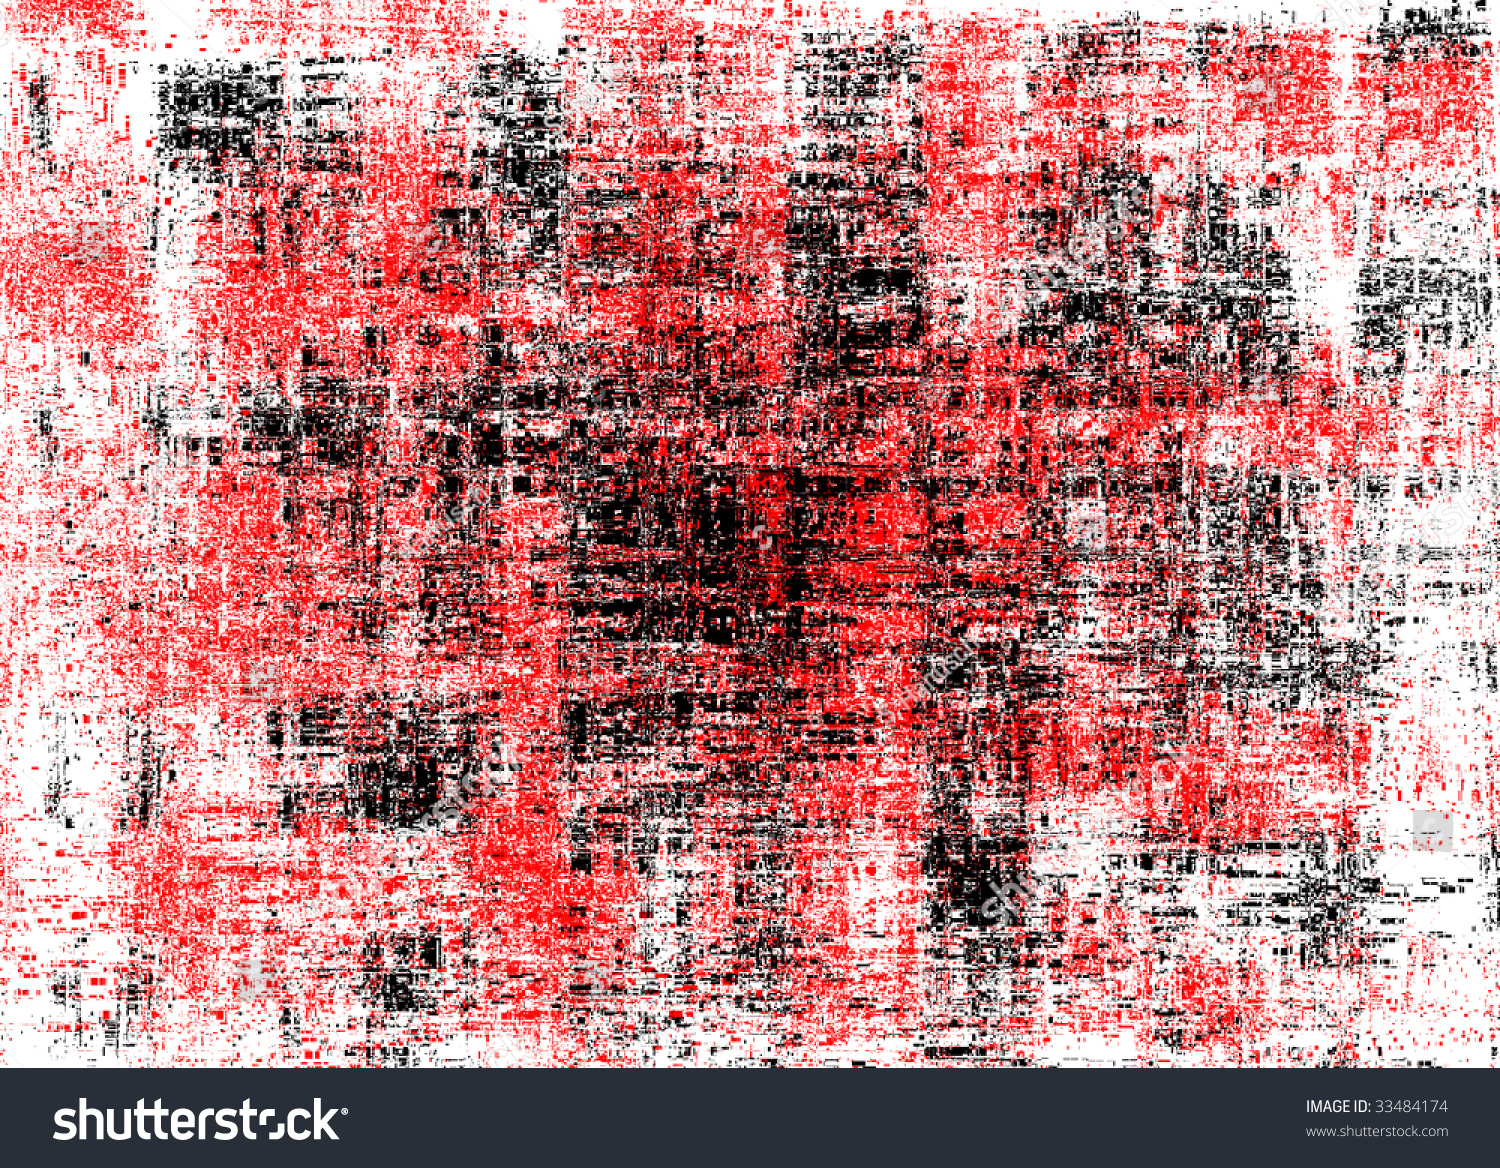 Abstract Background, Red, White, Black Stock Photo 33484174 : Shutterstock